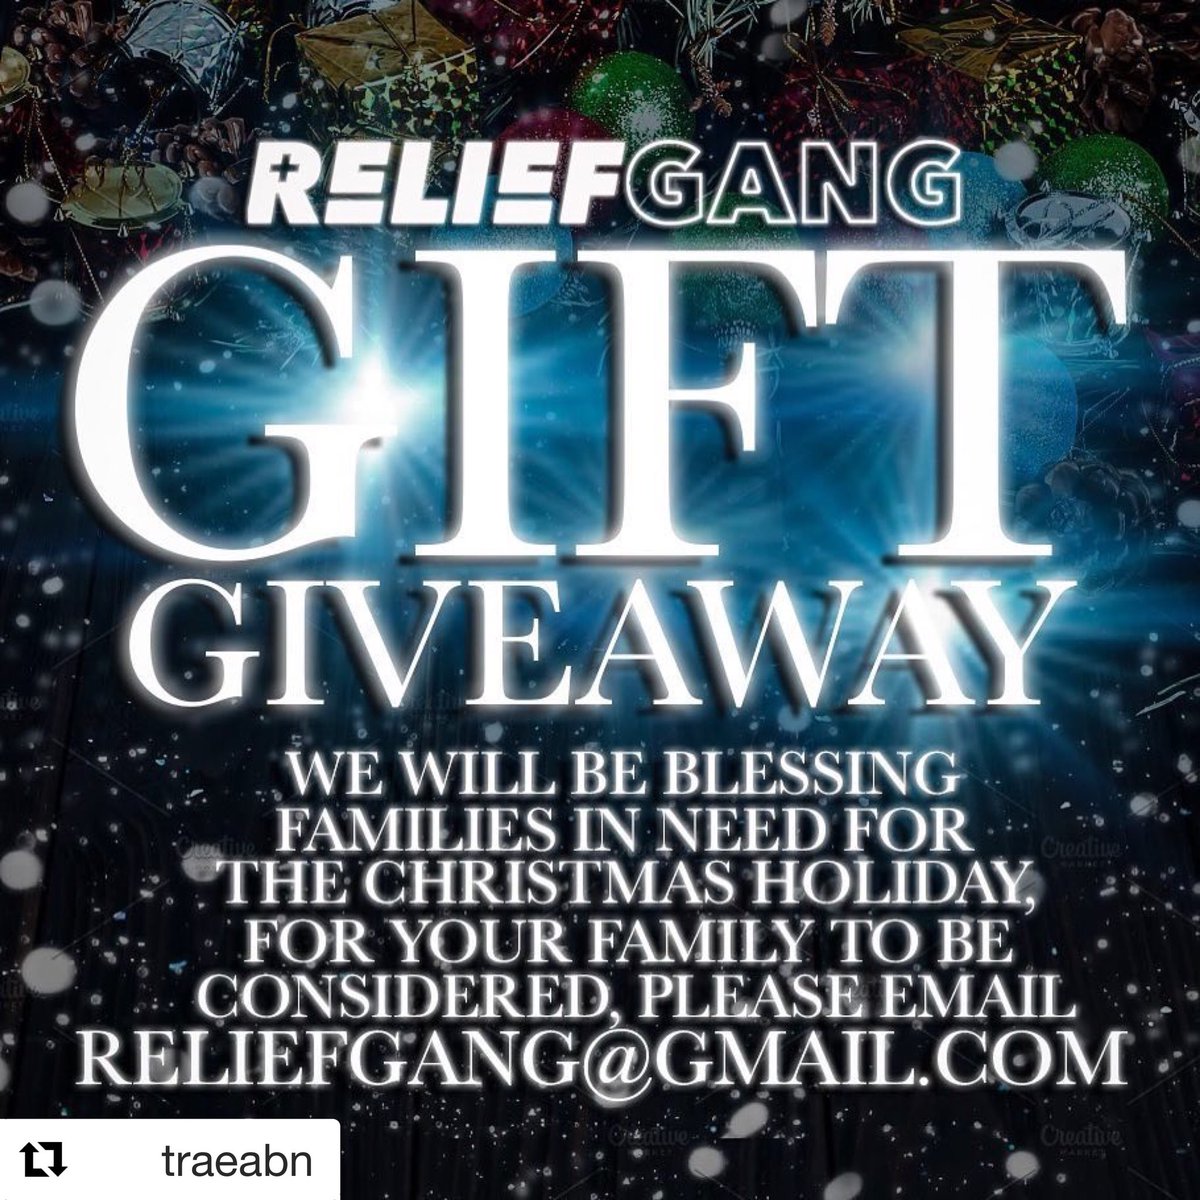 #NewProfilePic ON THA 11TH DAY OF #CHRISTMAS....#GiftAway #Gifts #Giftideas #GivingTuesday #givingtuesday2018 #Houston #Hous #Htx #Pasadena #Galveston #Texas #ReliefGang #Email #now 
#FOLLOW THEM @ReliefGang FOR MORE INFO STAY GLUED....